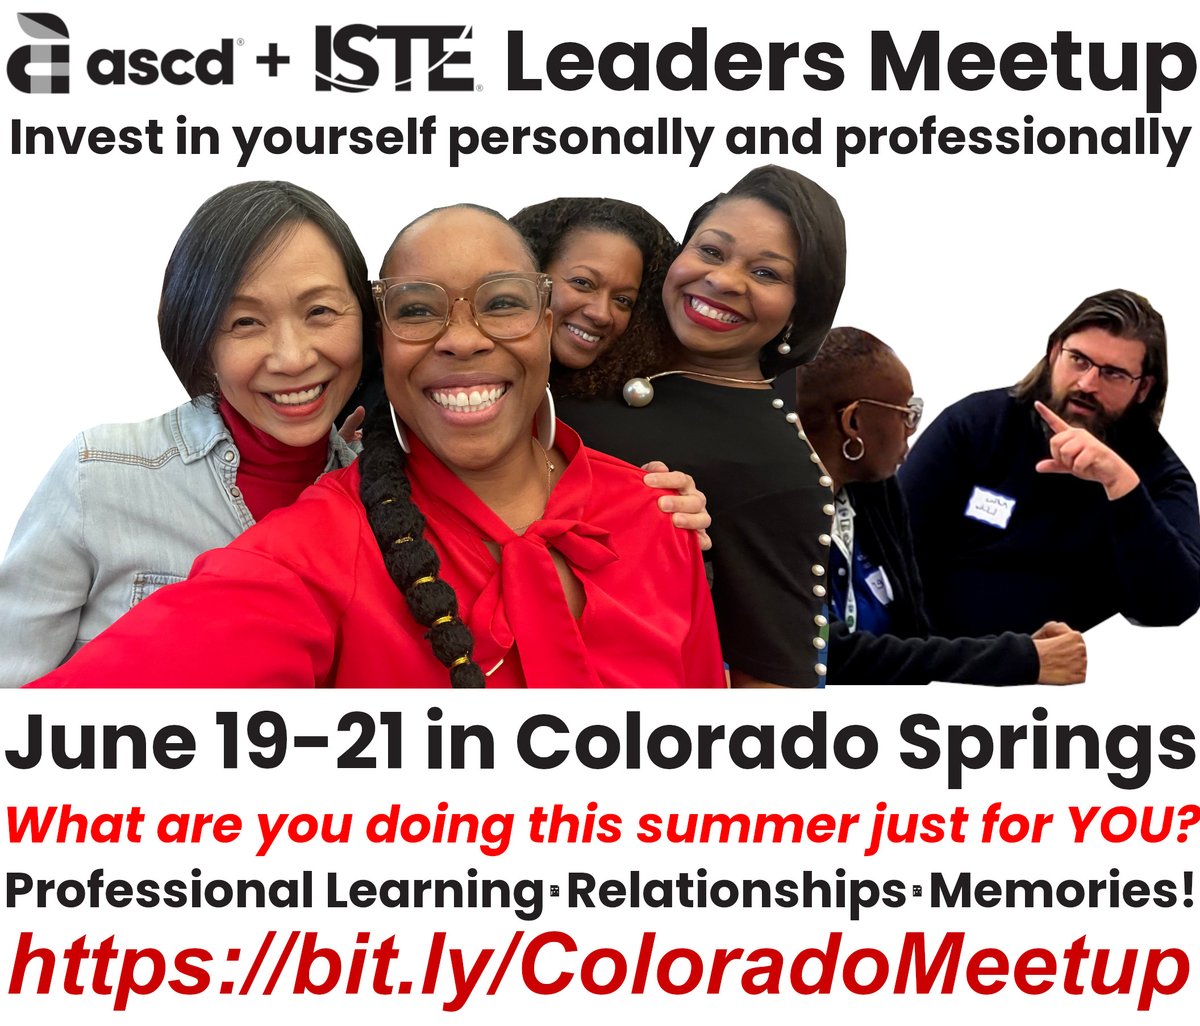 Educator wellness personified. Look at those smiles! Join us - COlorado Springs is up next June 19-21! bit.ly/ColoradoMeetup @ASCD @ISTEofficial #edchat #edutwitter #edreform #edadmin #edleadership #edpolicy #edtech #teachertwitter #K12 #highered